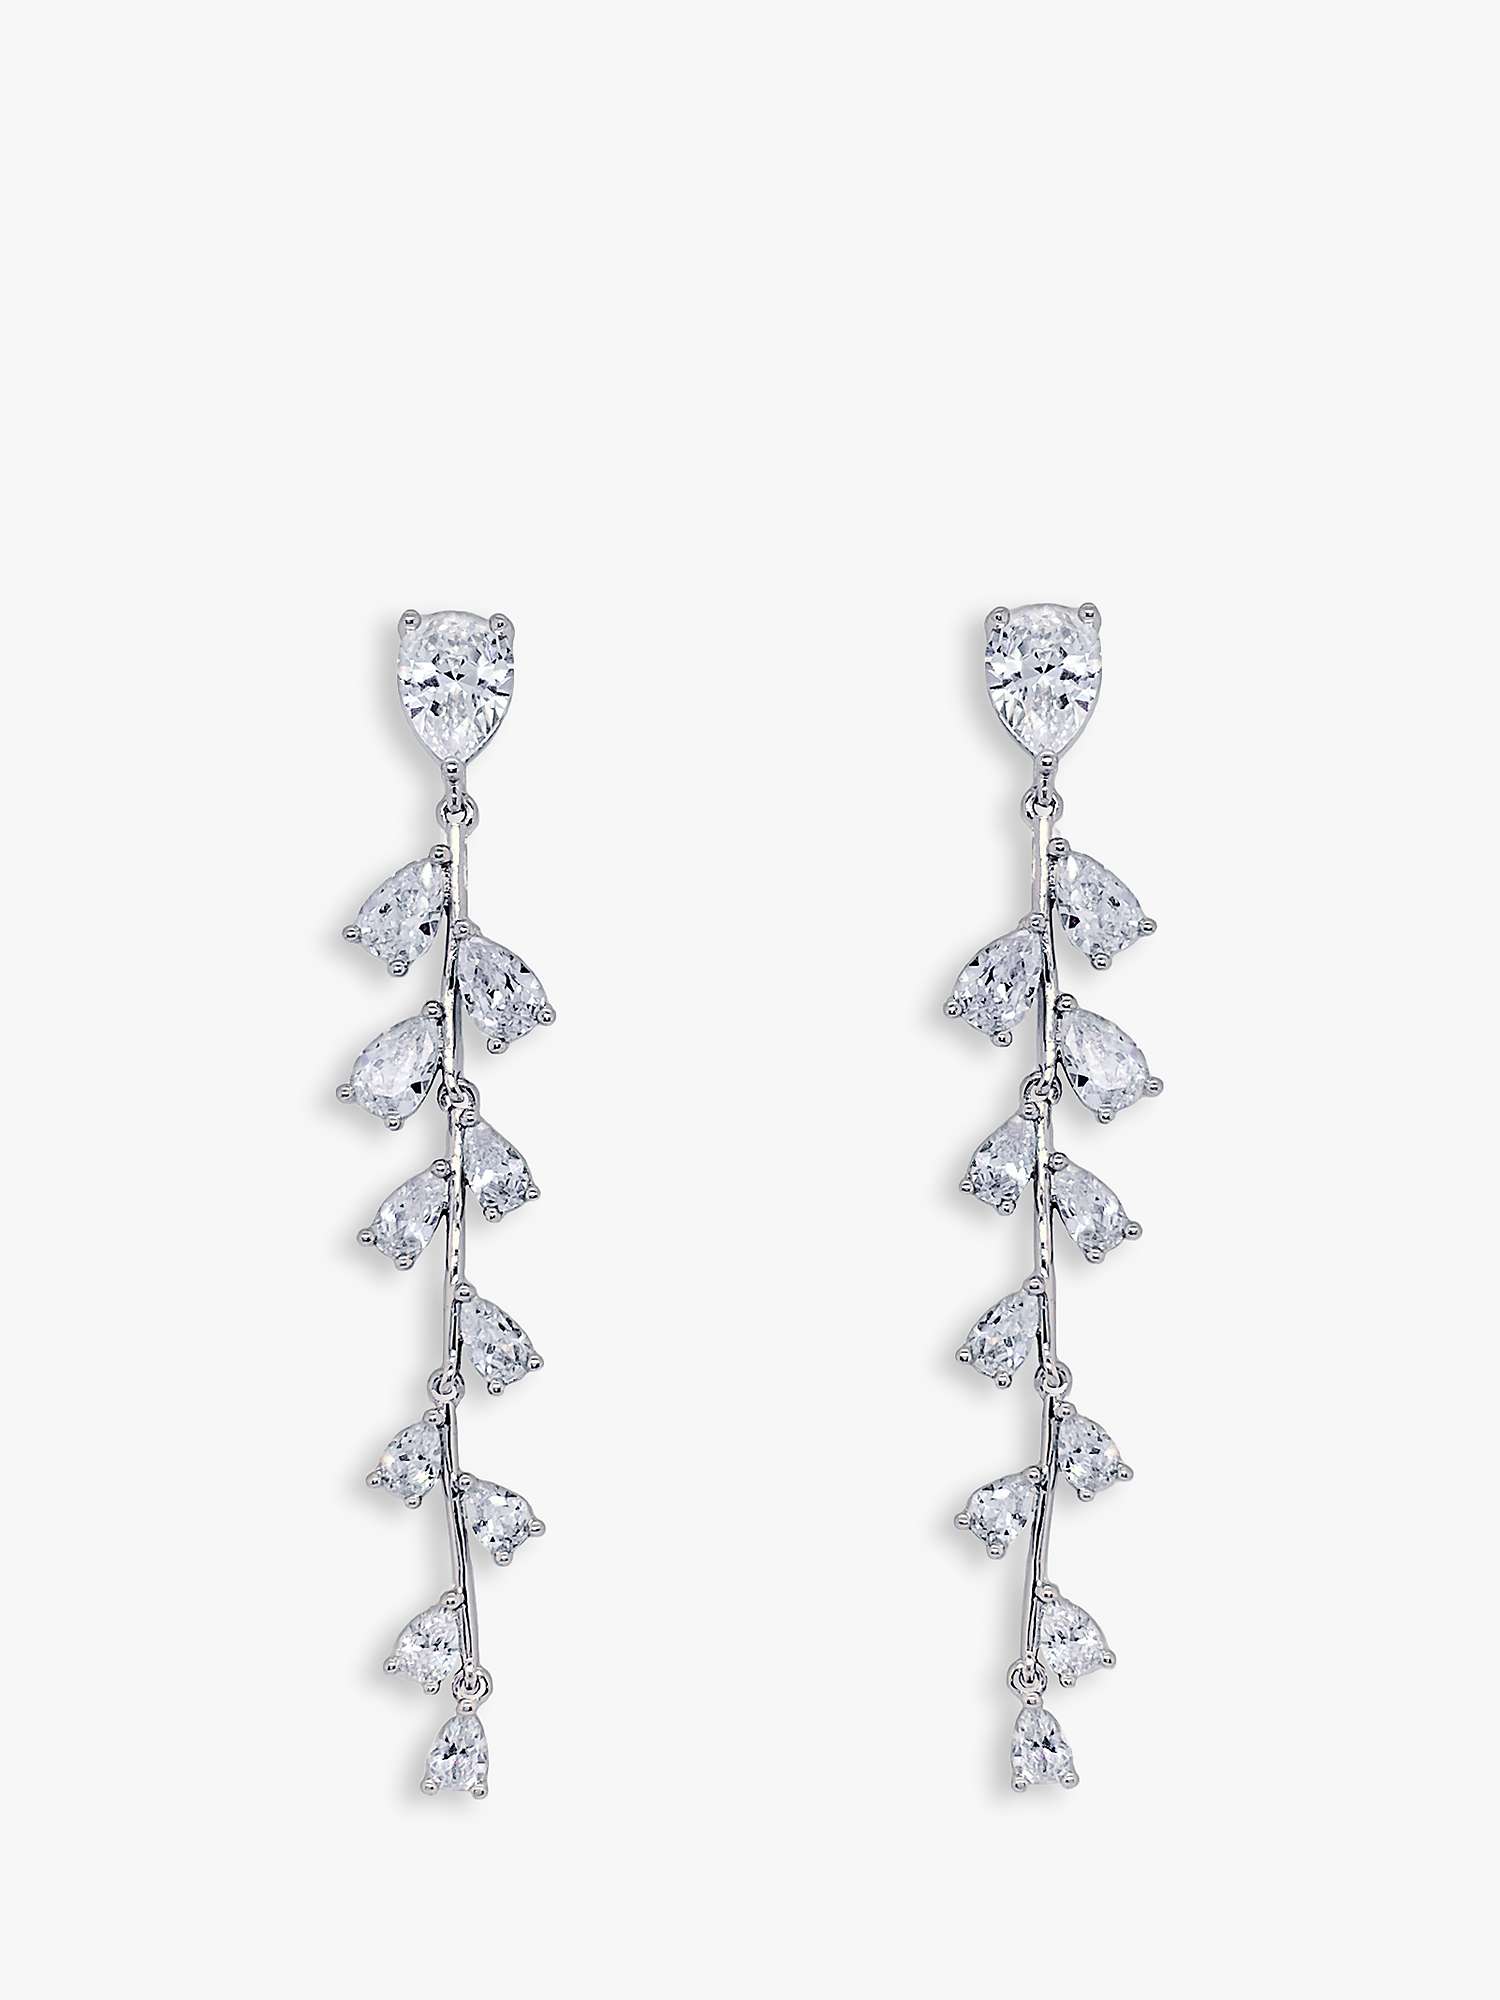 Buy Ivory & Co. Willow Drop Earrings, Silver Online at johnlewis.com